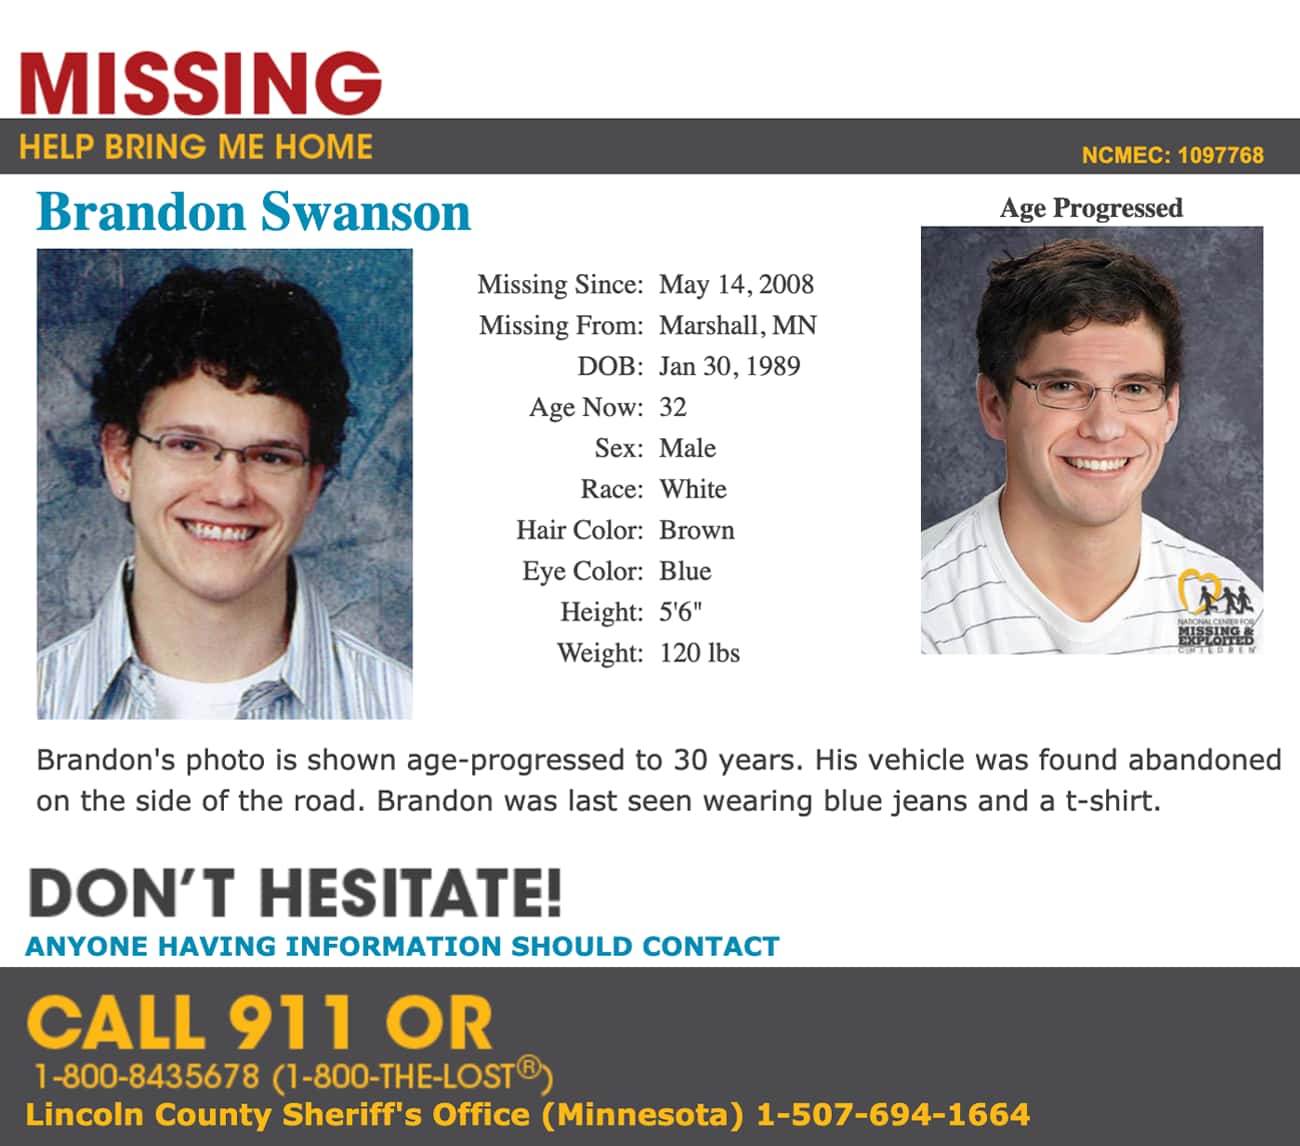 What Happened To Brandon Swanson? The Strange Disappearance Behind